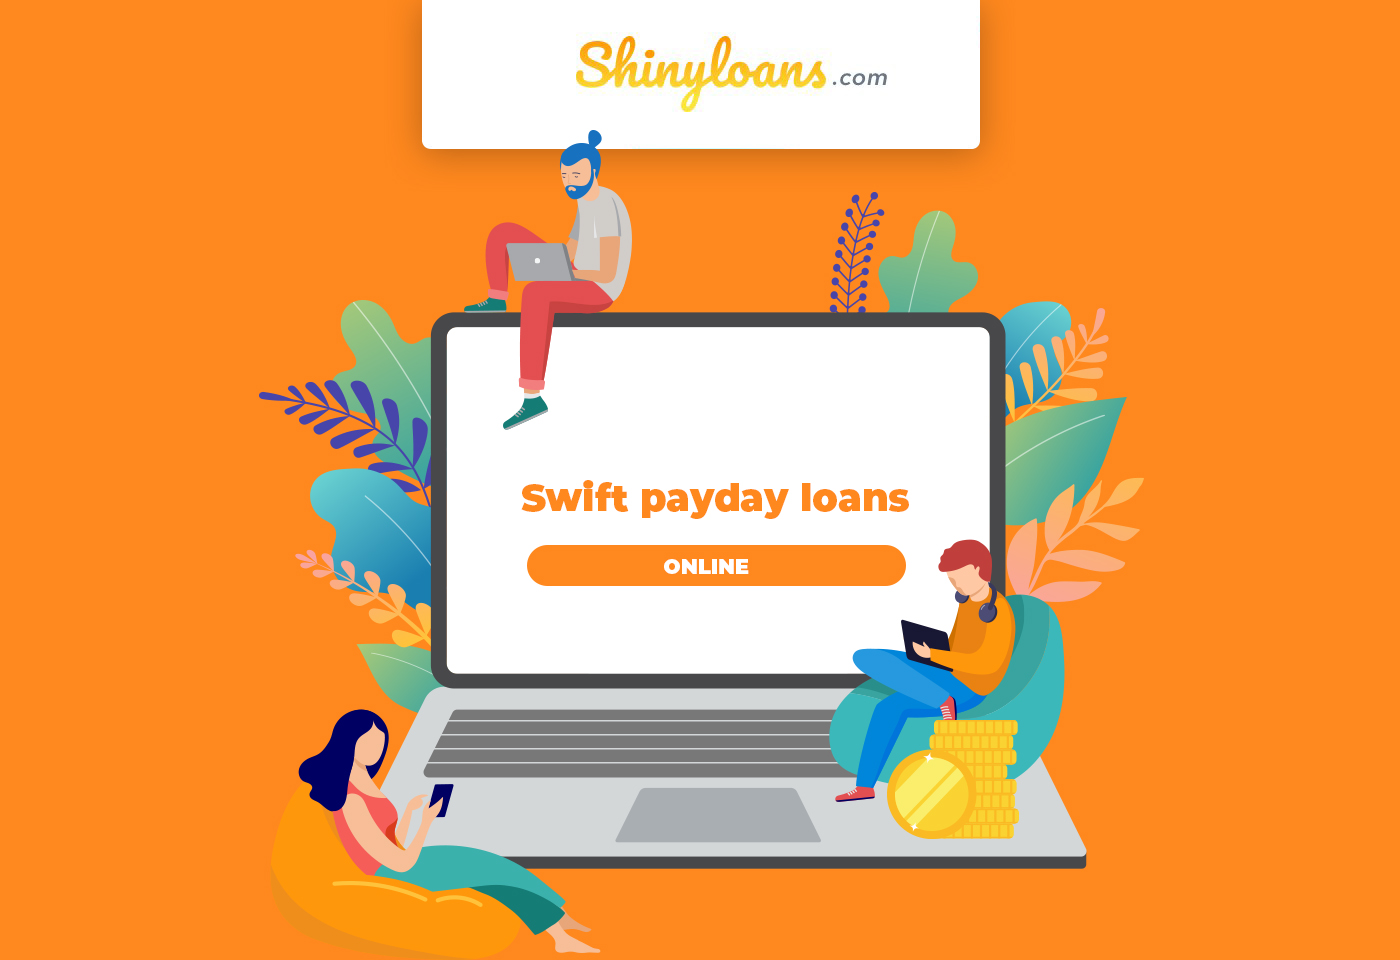 Swift Payday Loans Online